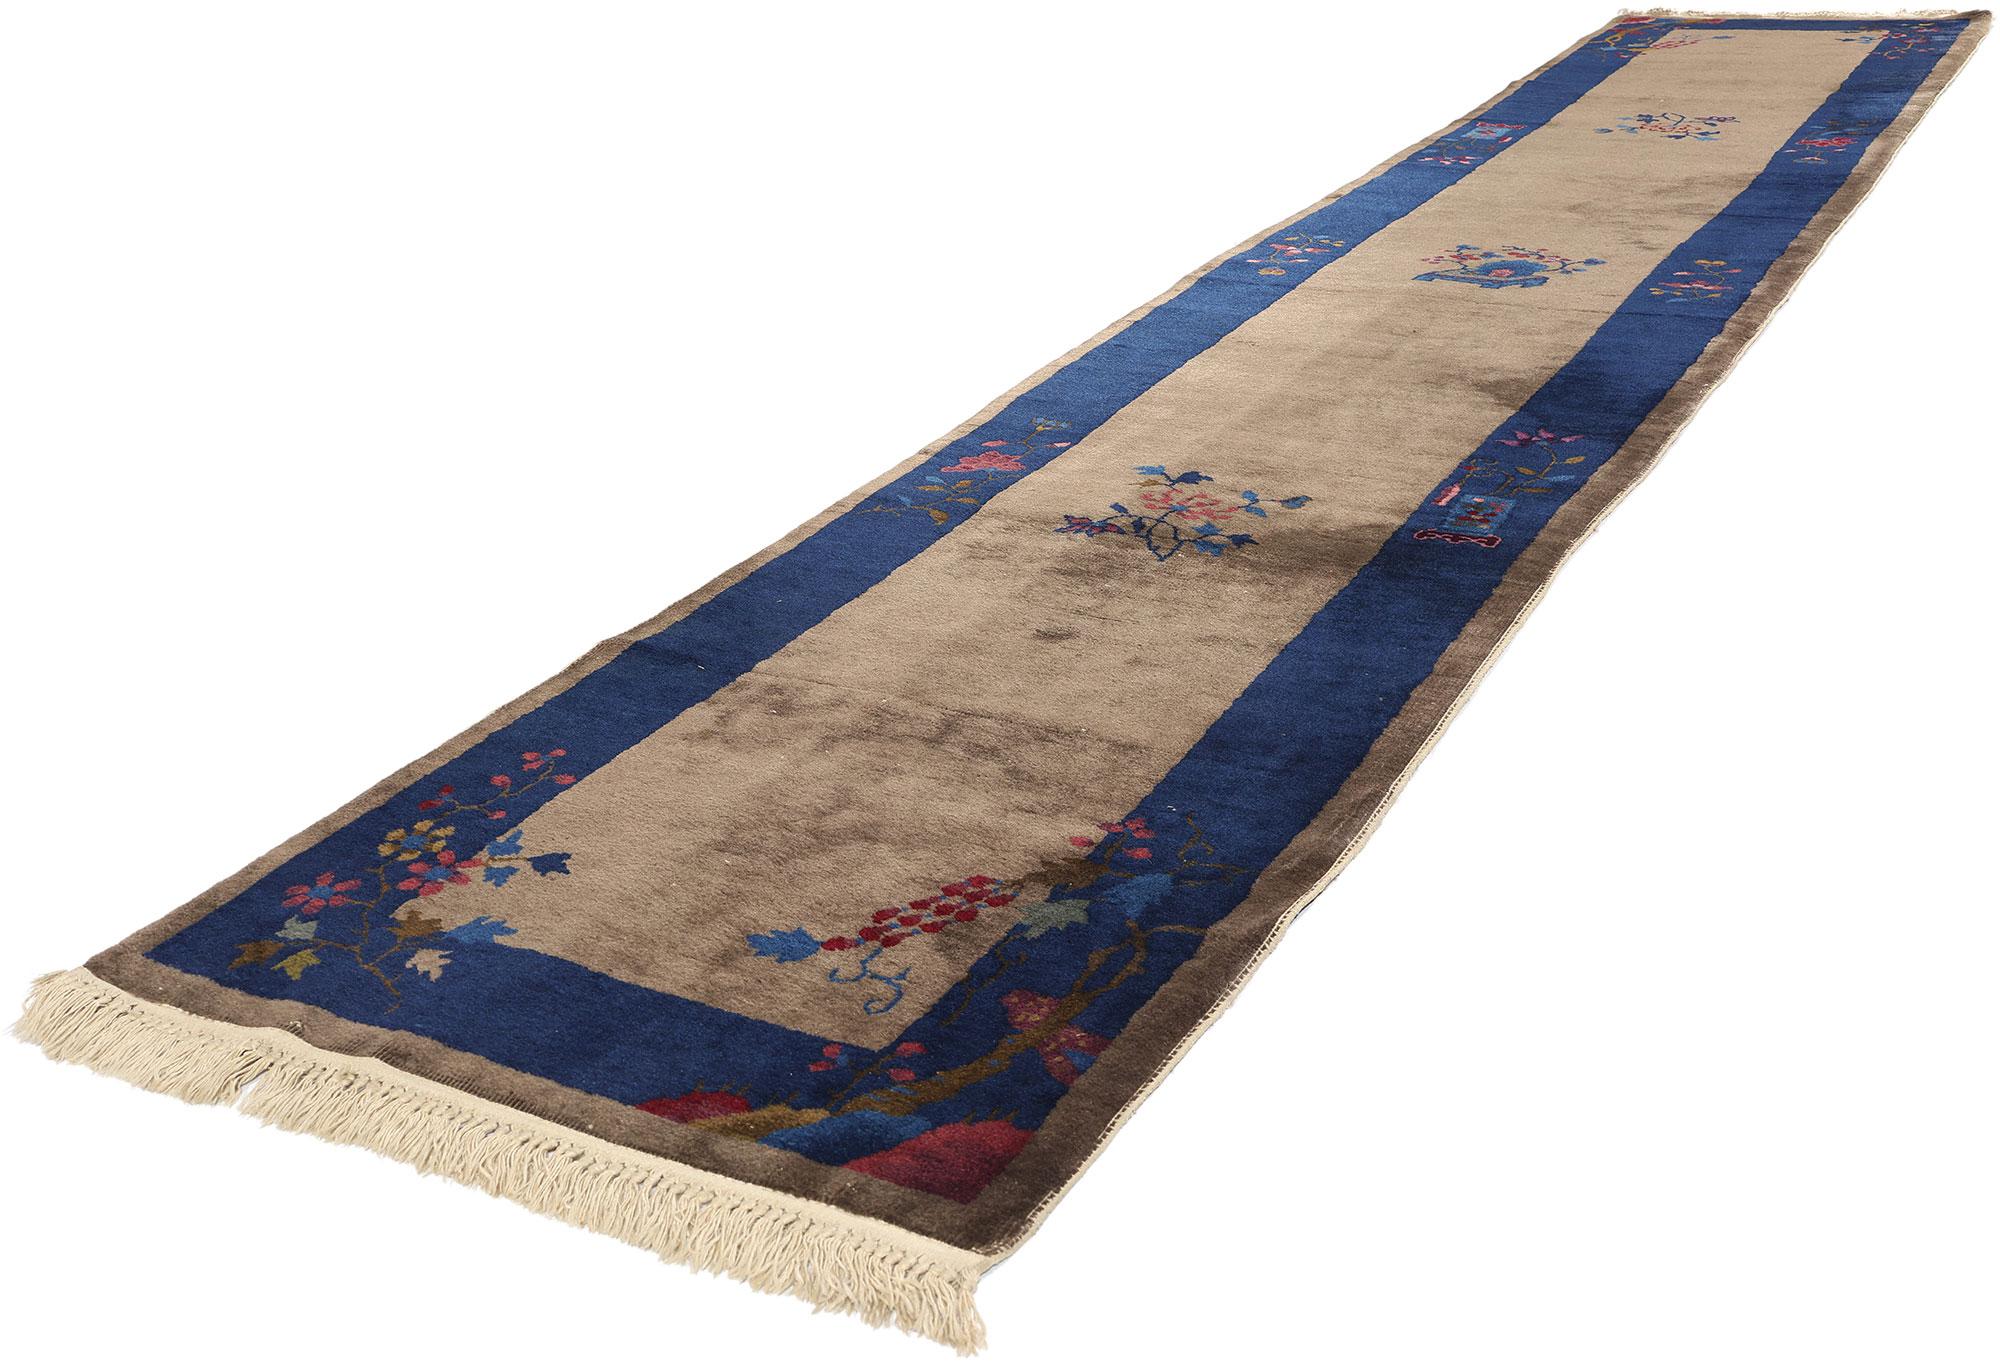 78200 Antique Chinese Peking Rug Runner, 02'07 x 14'04. Behold the timeless allure of this meticulously hand-knotted wool antique Chinese Peking rug runner, where artistry and nature converge in a captivating dance of color and floral splendor. A